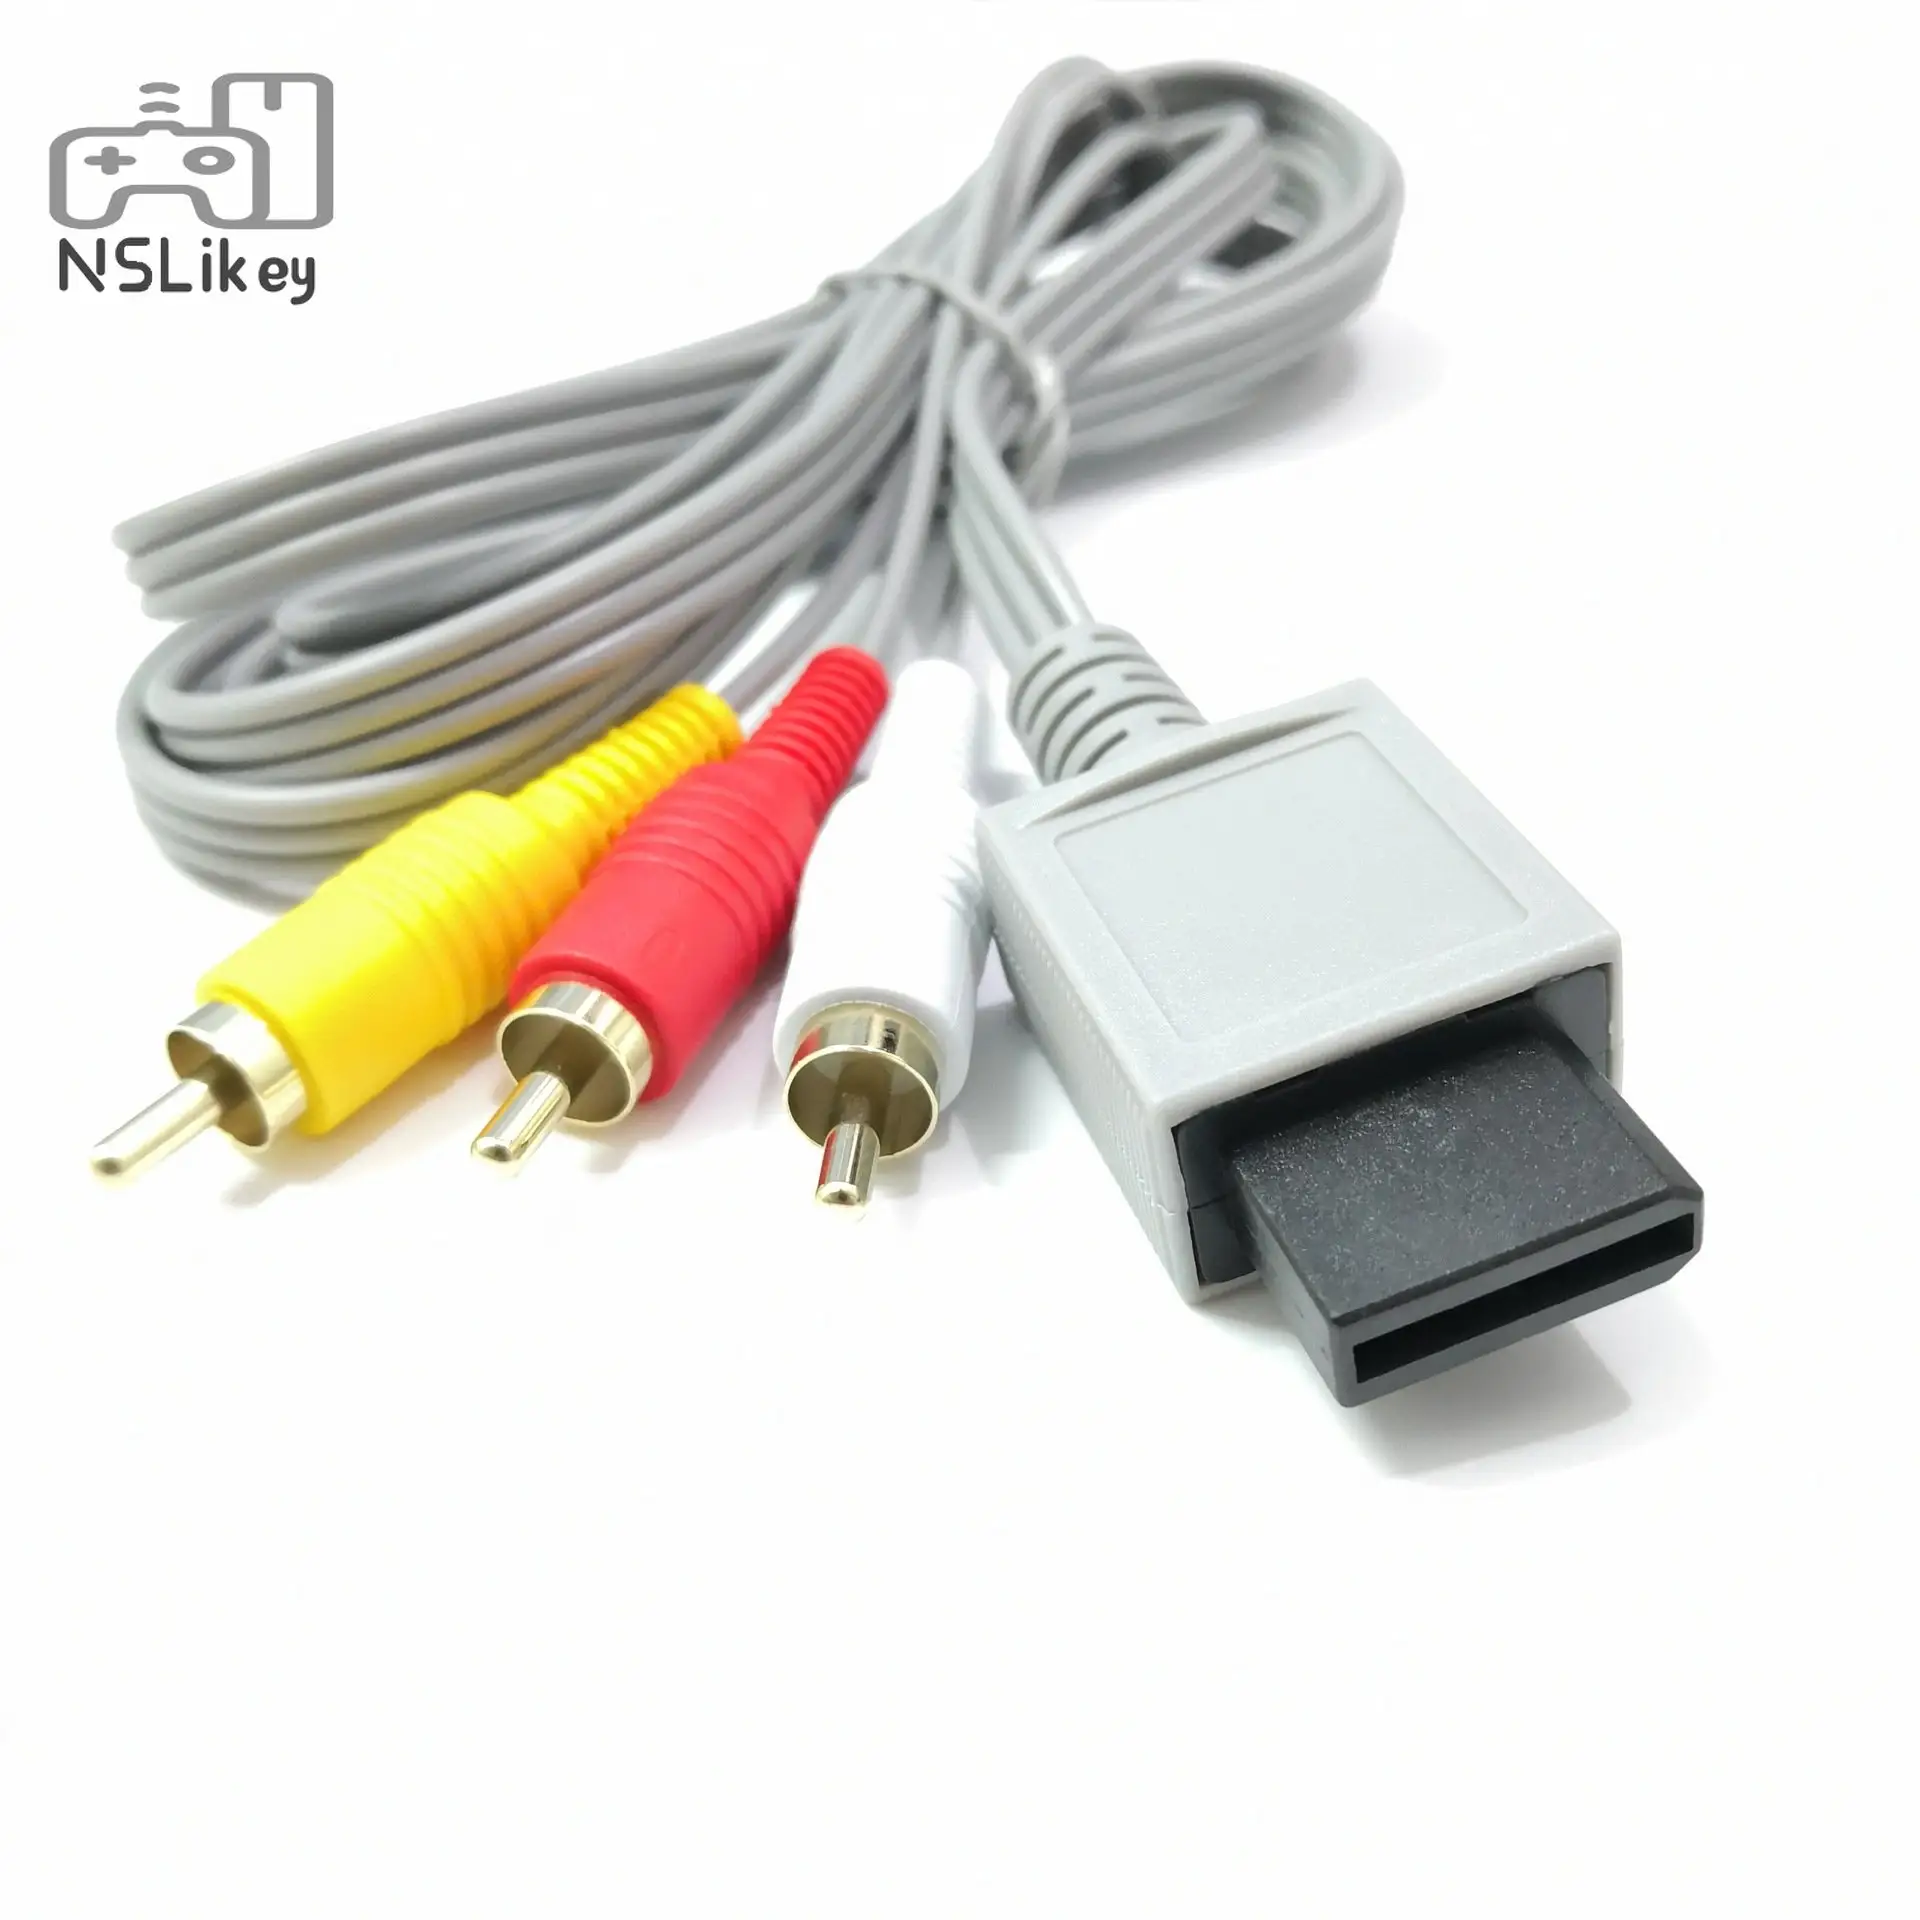 NSLikey 1.8m AV Cable for For Nintendo Wii Wii U Console Audio Video AV Cable